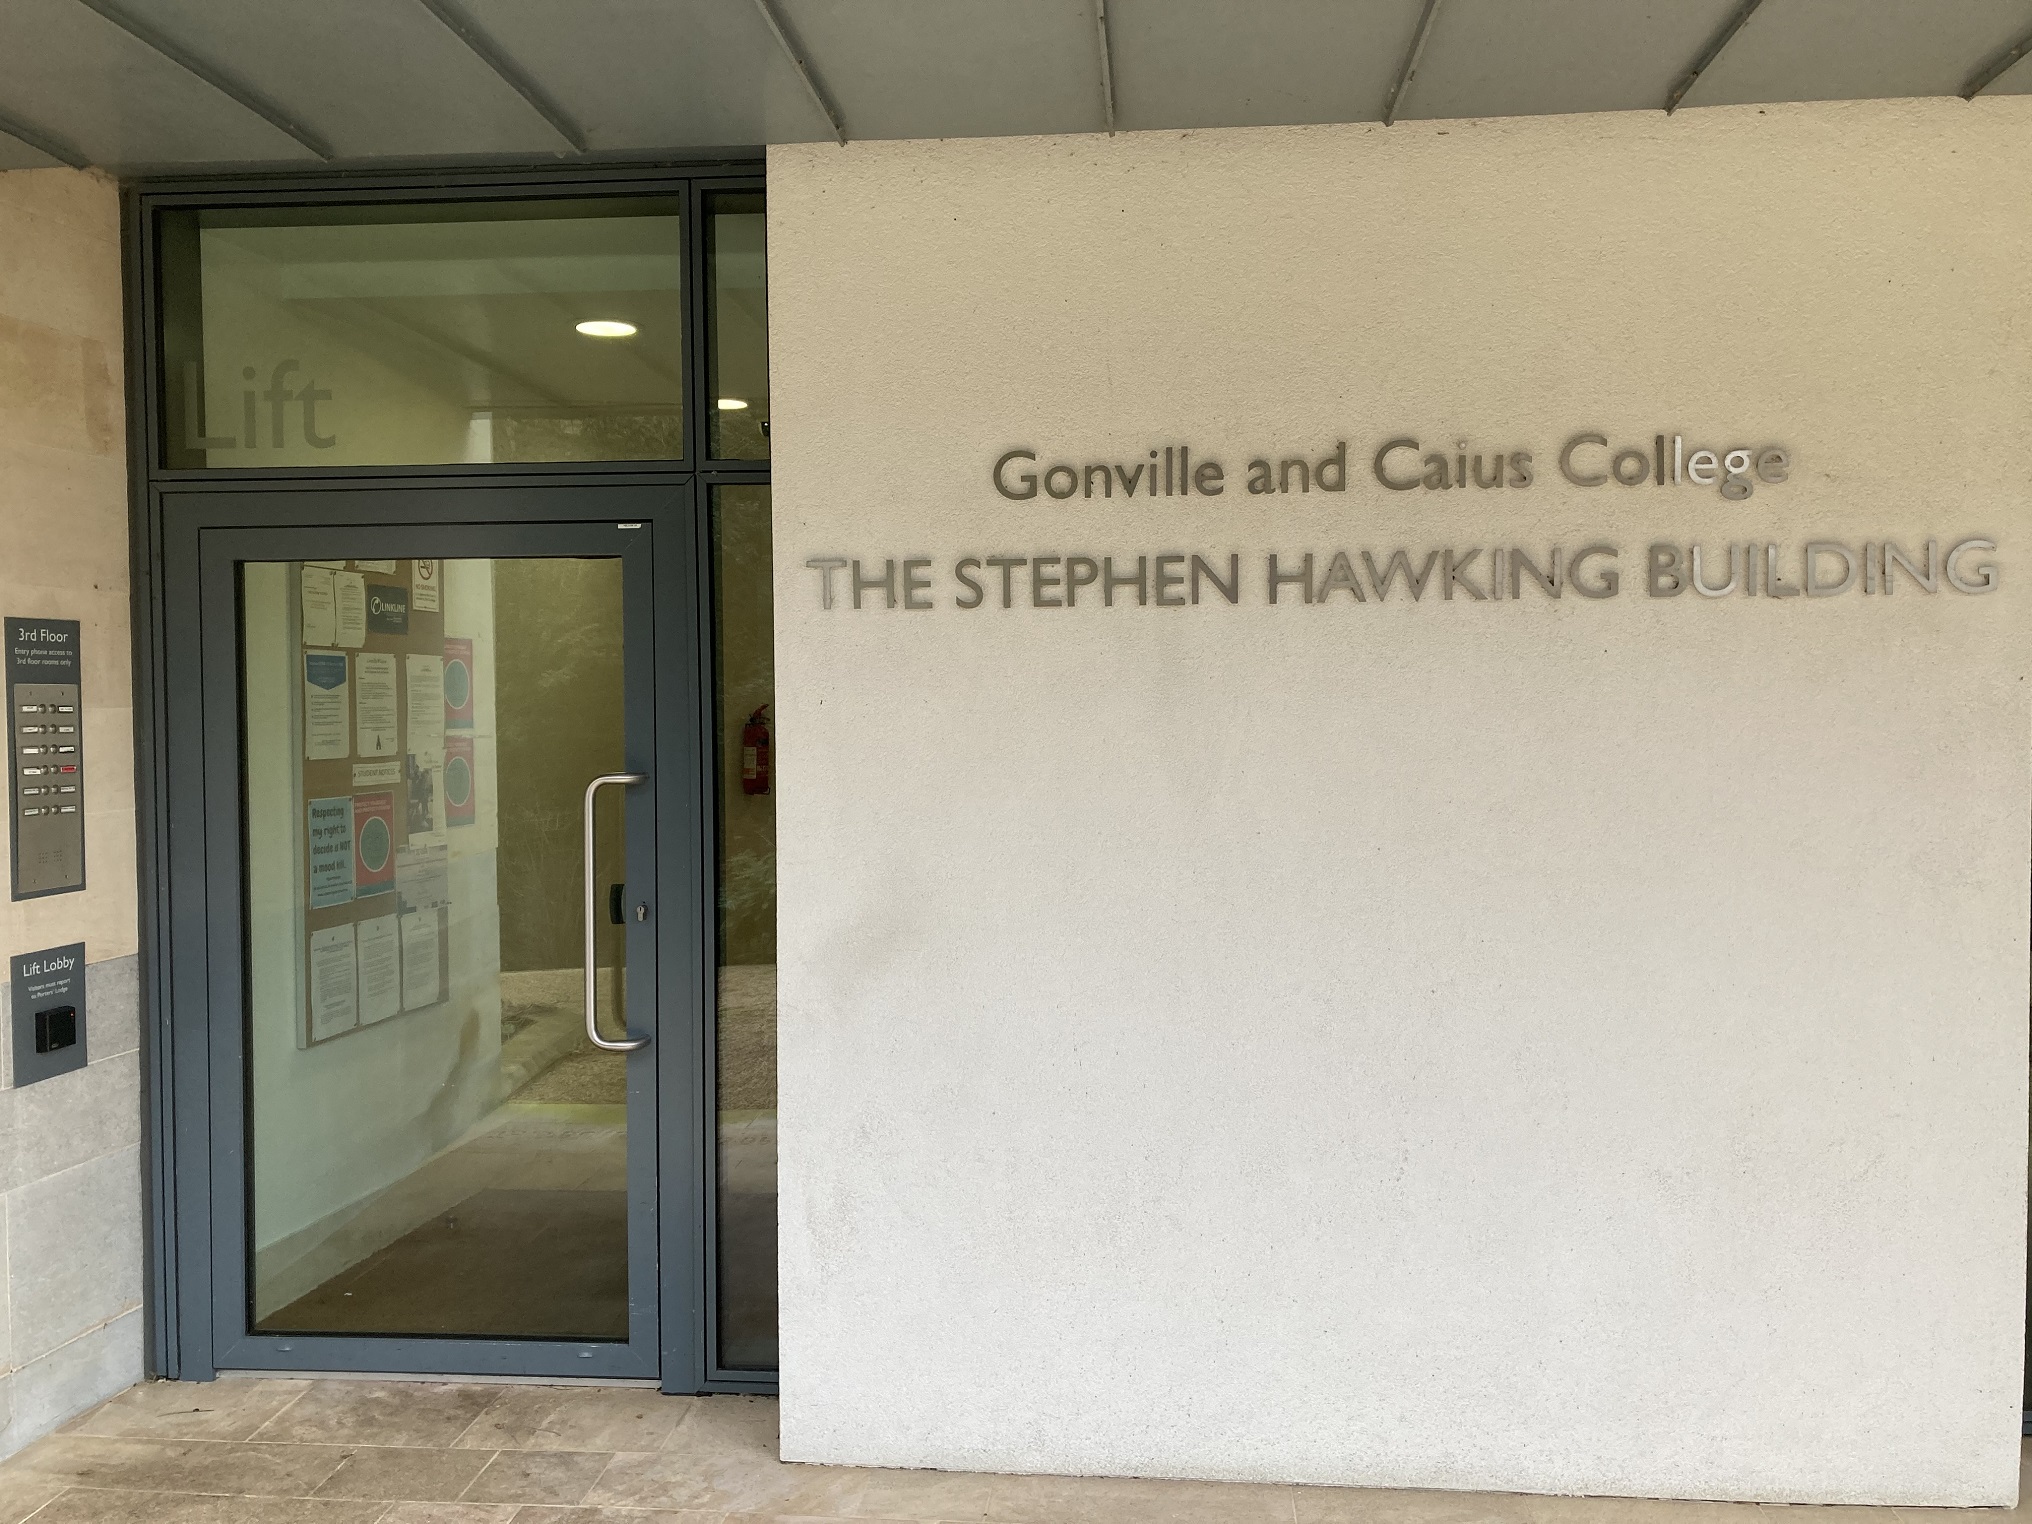 The entrance door to The Stephen Hawking Building